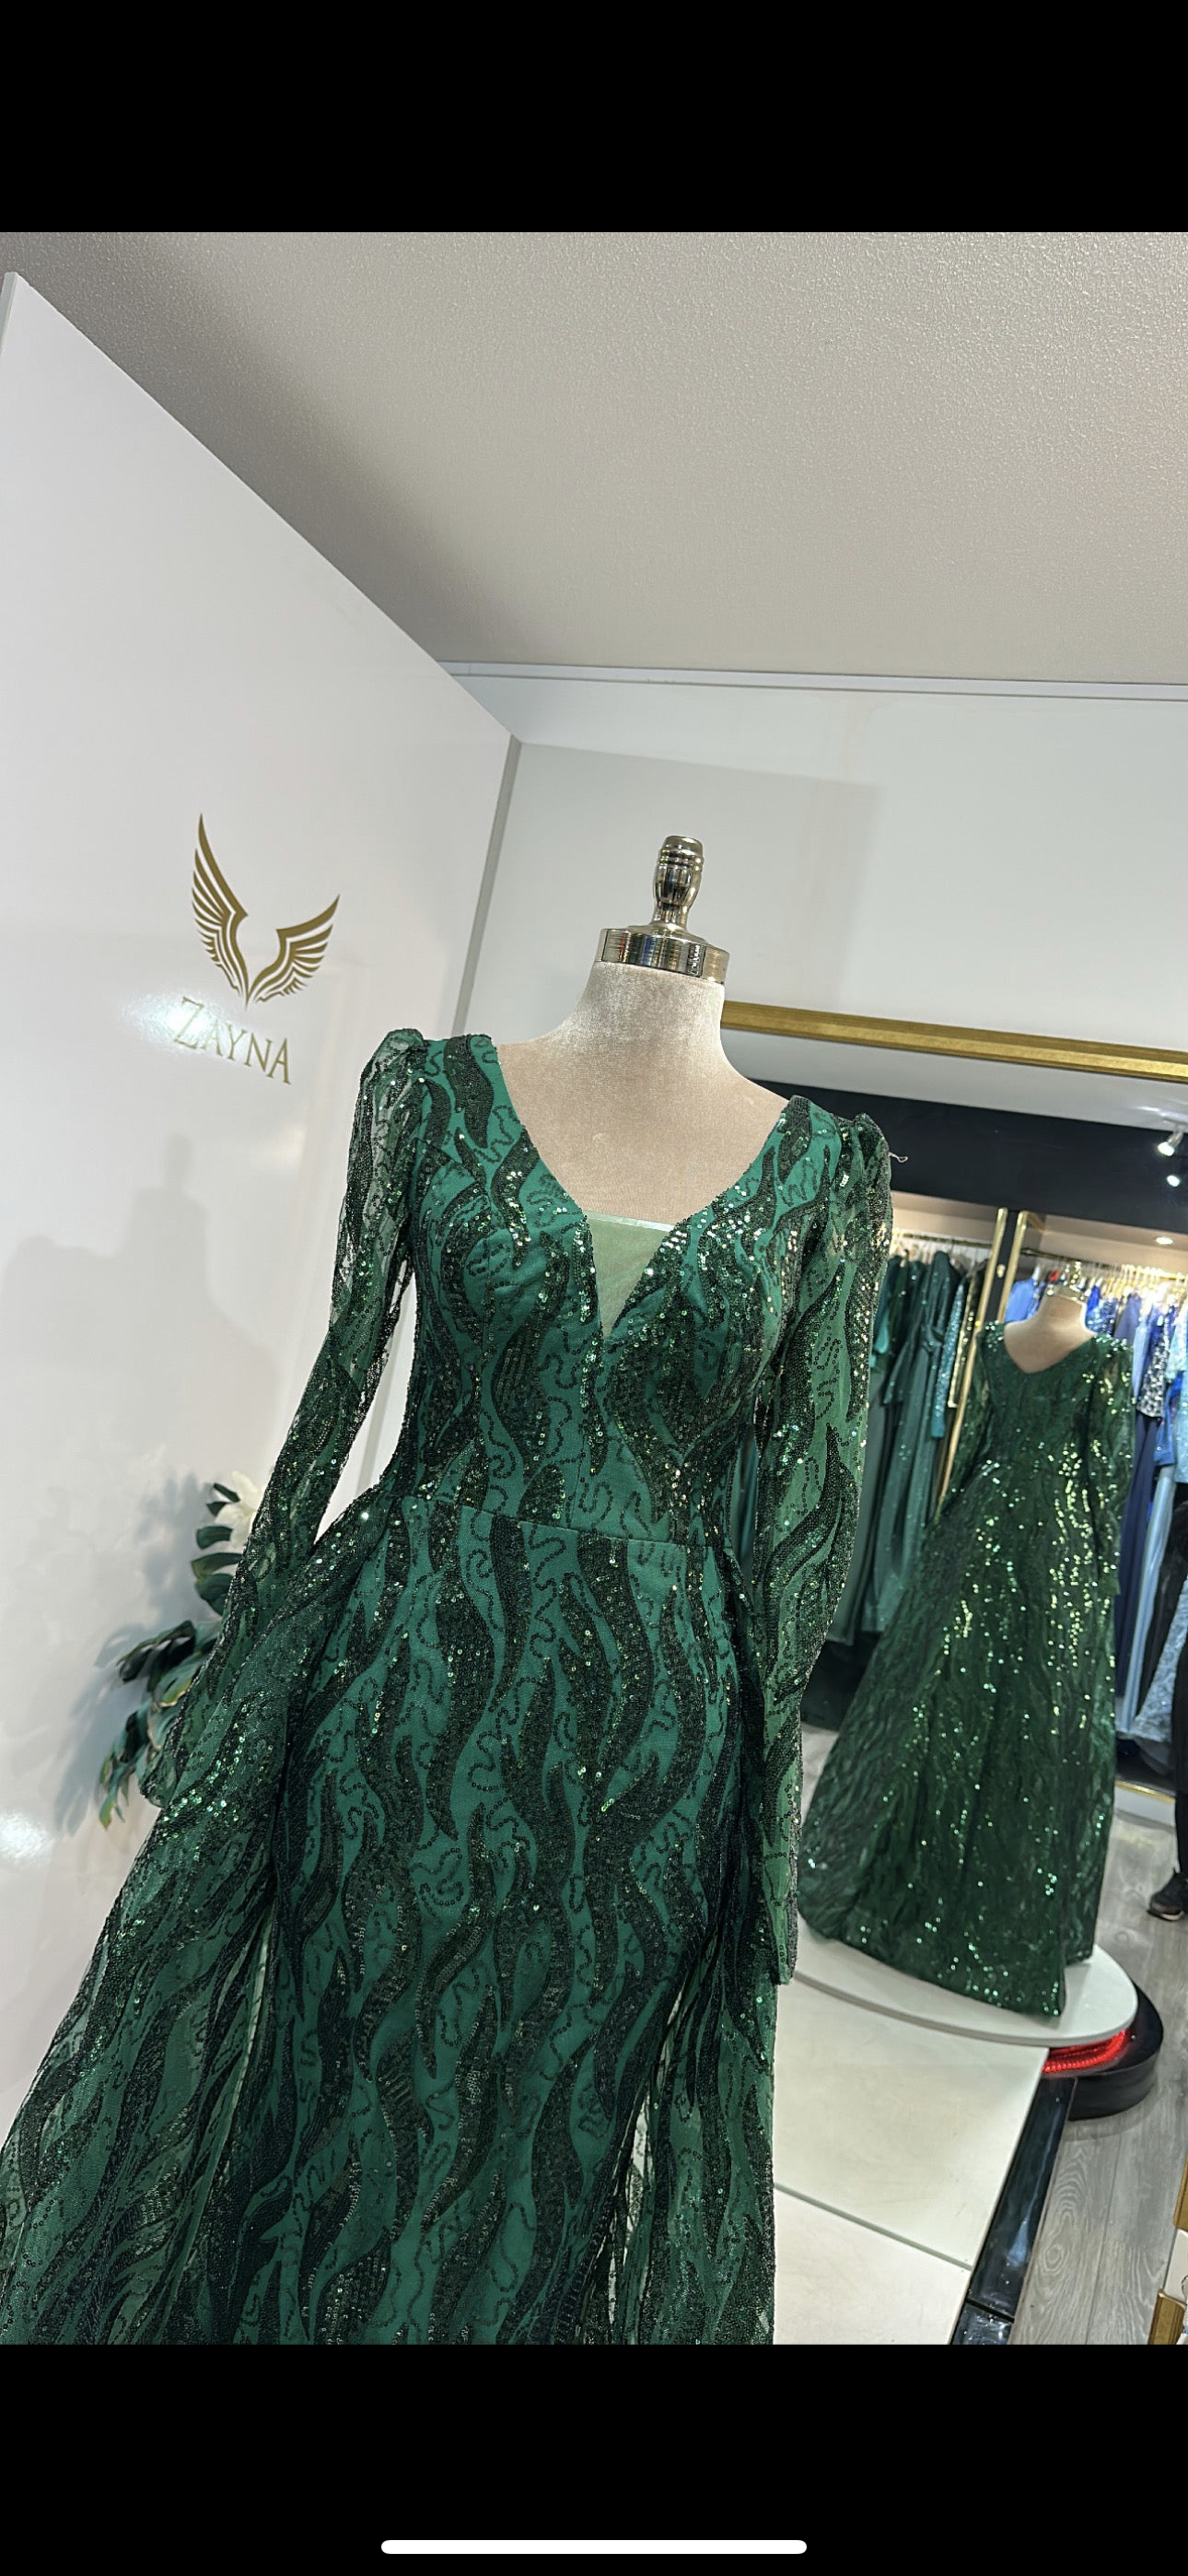 Elegant green dress with glitter and veil